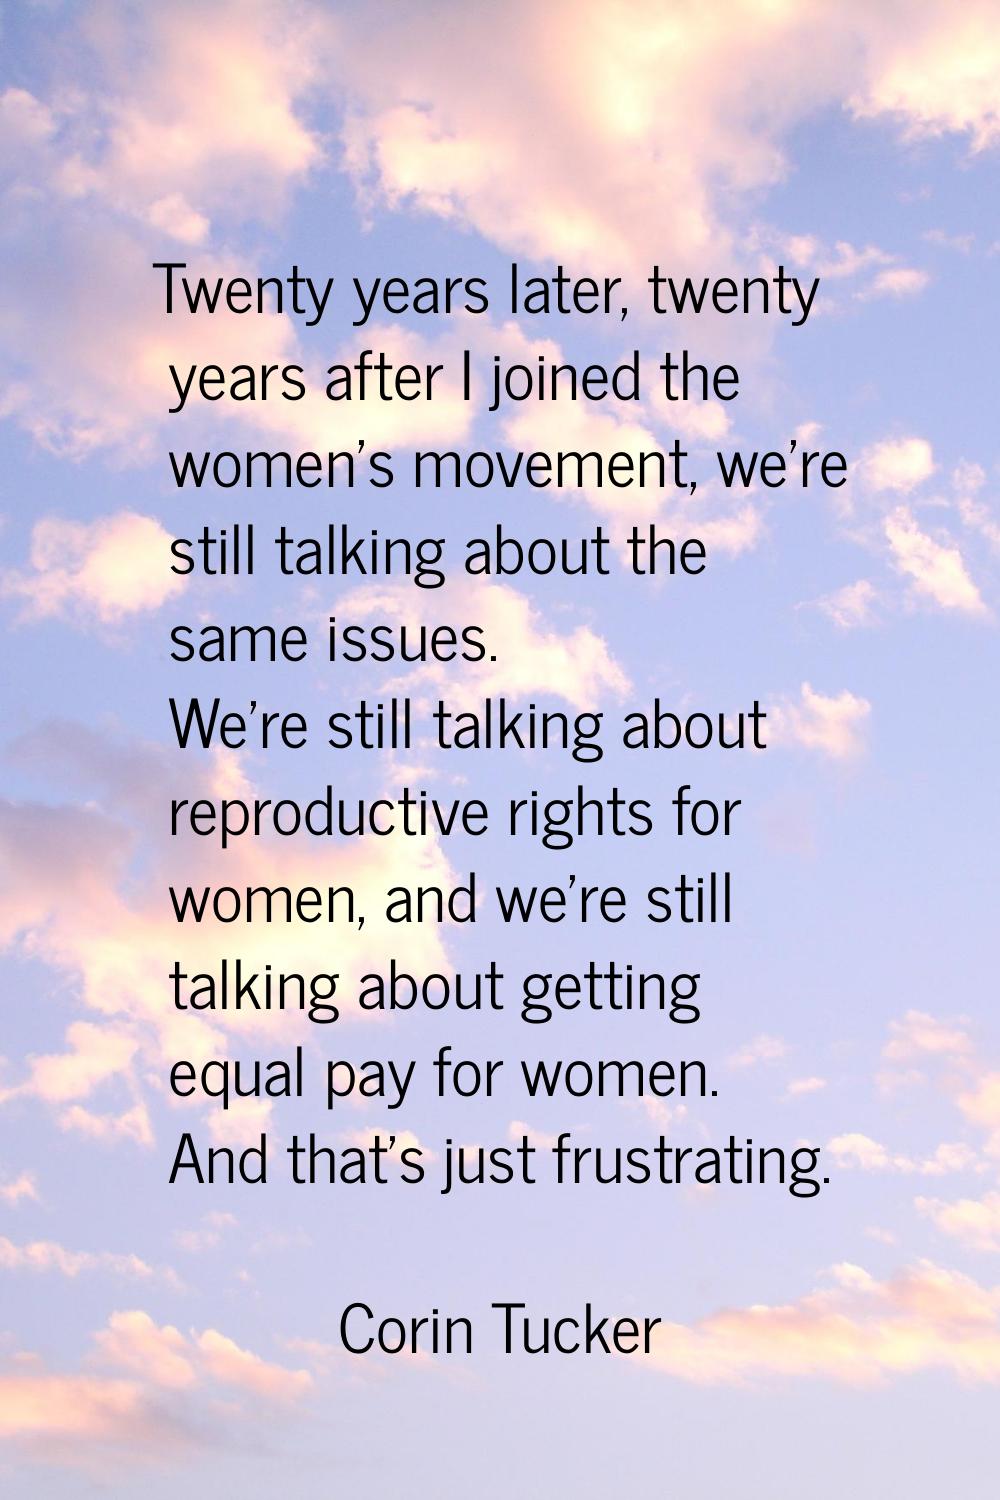 Twenty years later, twenty years after I joined the women's movement, we're still talking about the